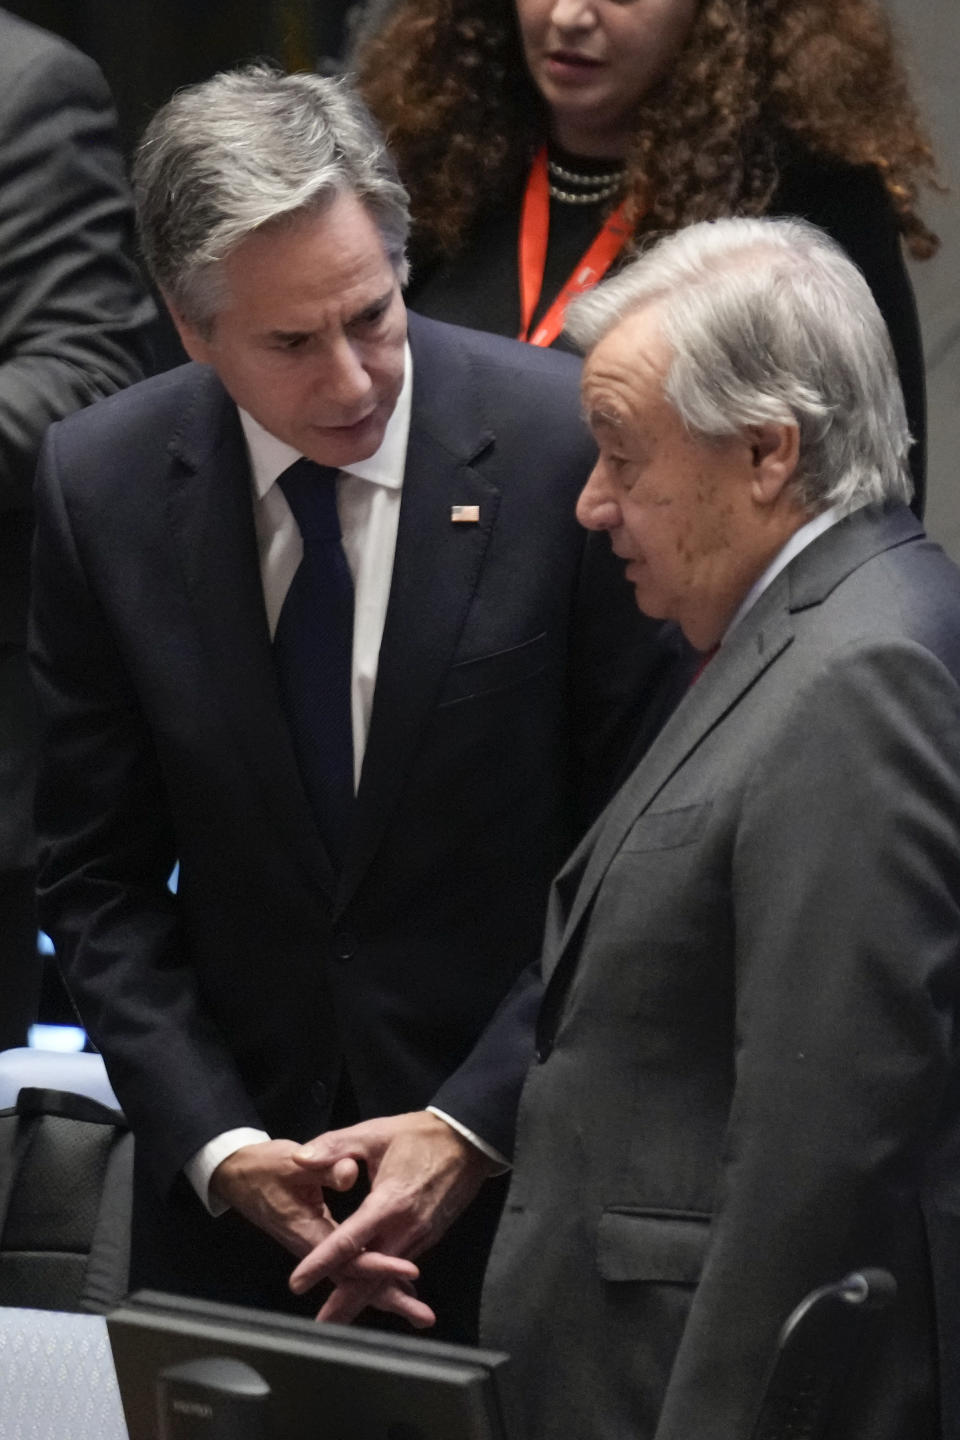 U.S. Secretary of State Antony Blinken, left, talks with United Nations Secretary-General Antonio Guterres before a Security Council meeting at United Nations headquarters, Tuesday, Oct. 24, 2023. (AP Photo/Seth Wenig)